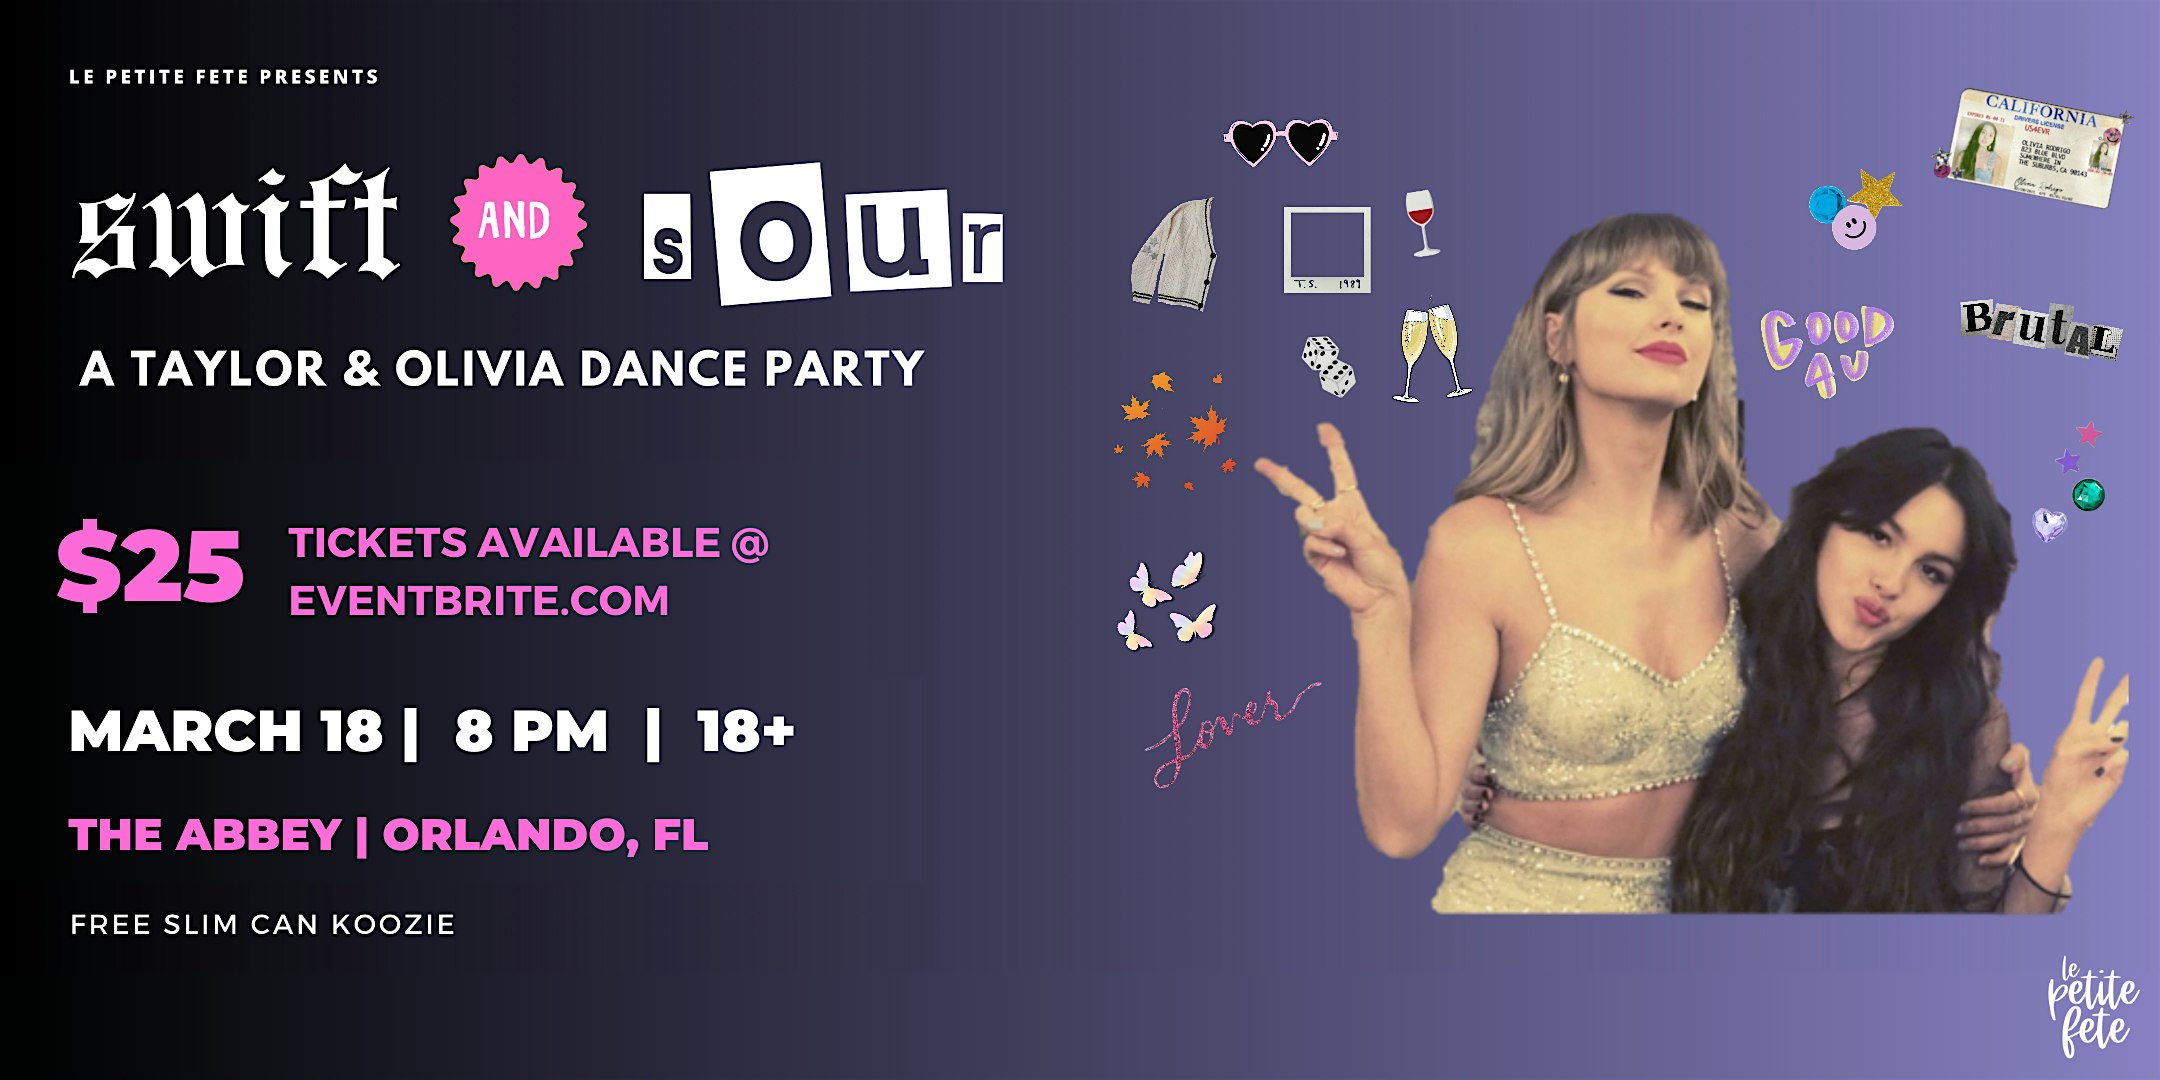 Swift and Sour: A Taylor & Olivia Dance Party